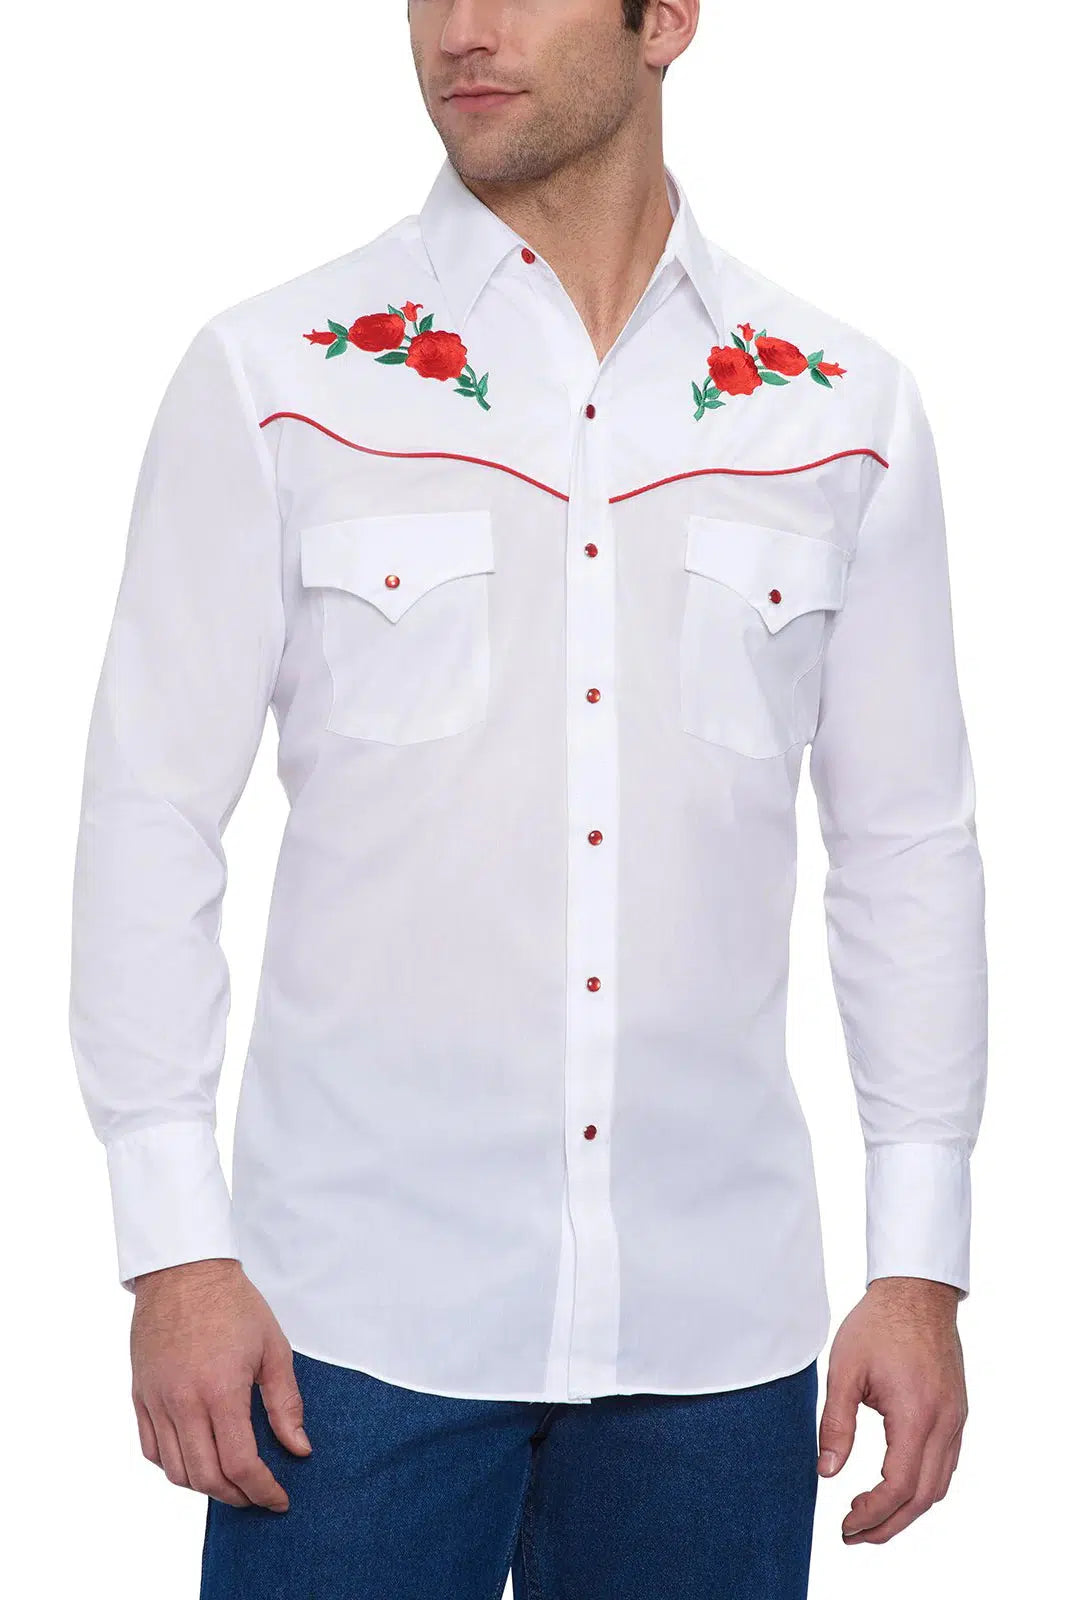 A man sporting an ELY Mens Embroidered Rose Western Shirt with embroidered red roses on its yokes.